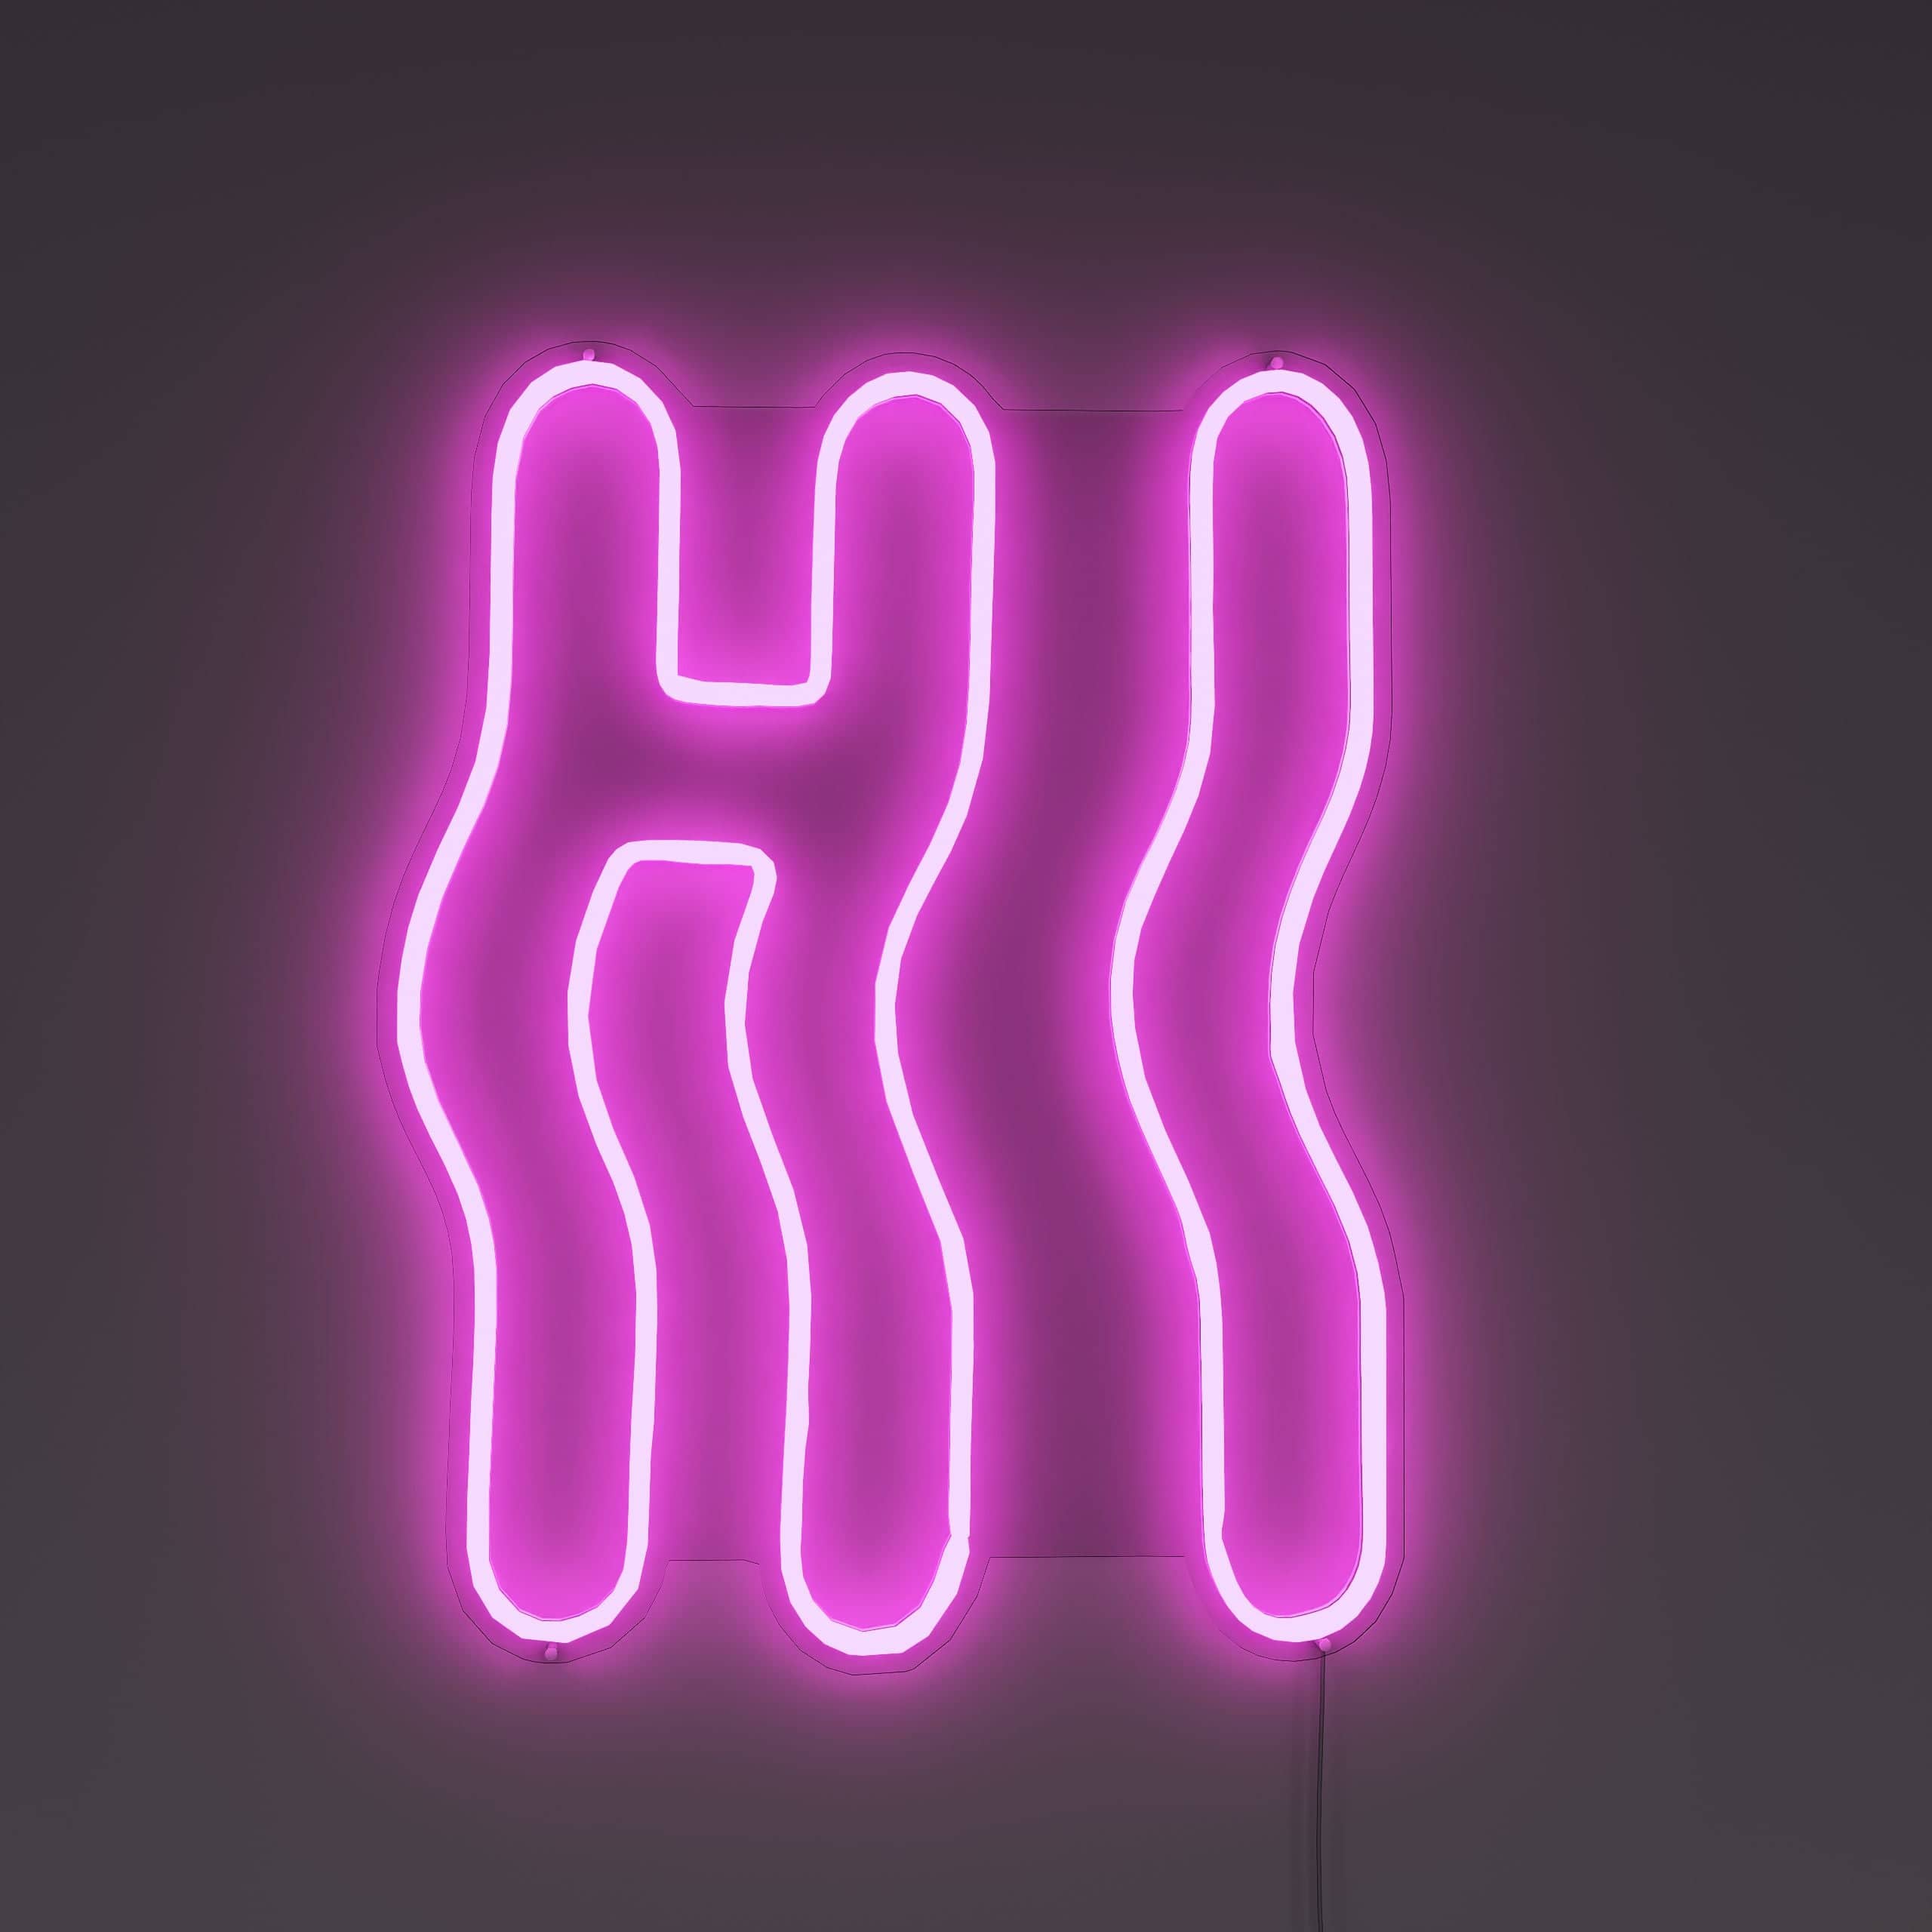 hi,-good-to-see-you!-neon-sign-lite